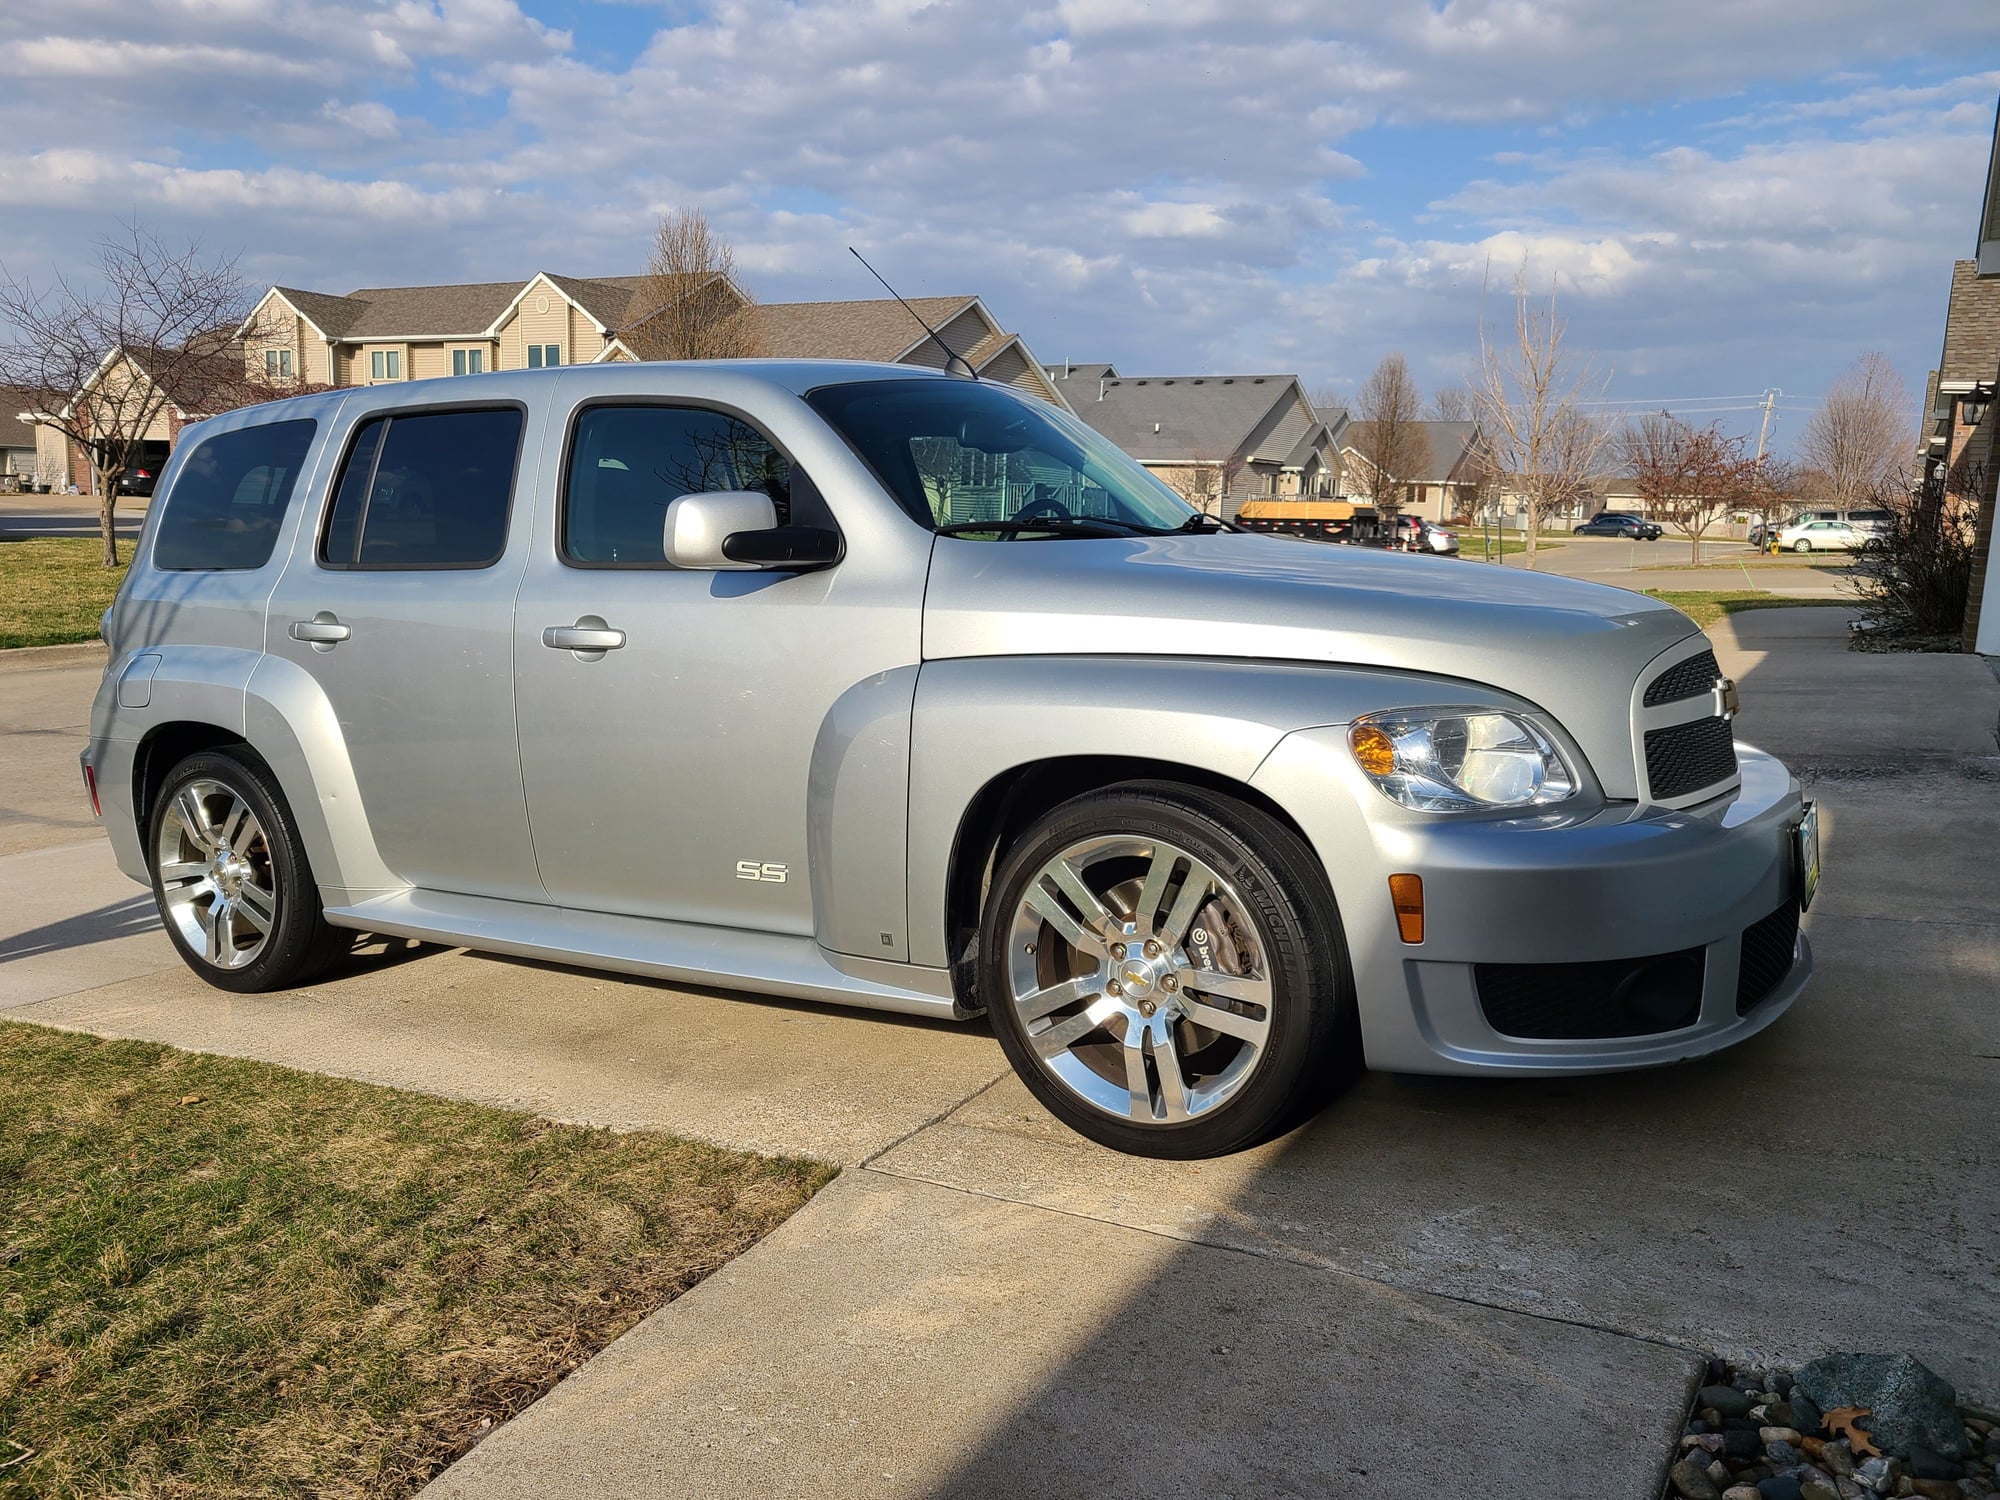 2009 Chevrolet HHR - 2009 Silver Chevy HHR SS - Used - VIN 3GNCA73X19S557881 - 63,000 Miles - 4 cyl - 2WD - Manual - Wagon - Silver - Des Moines, IA 50023, United States